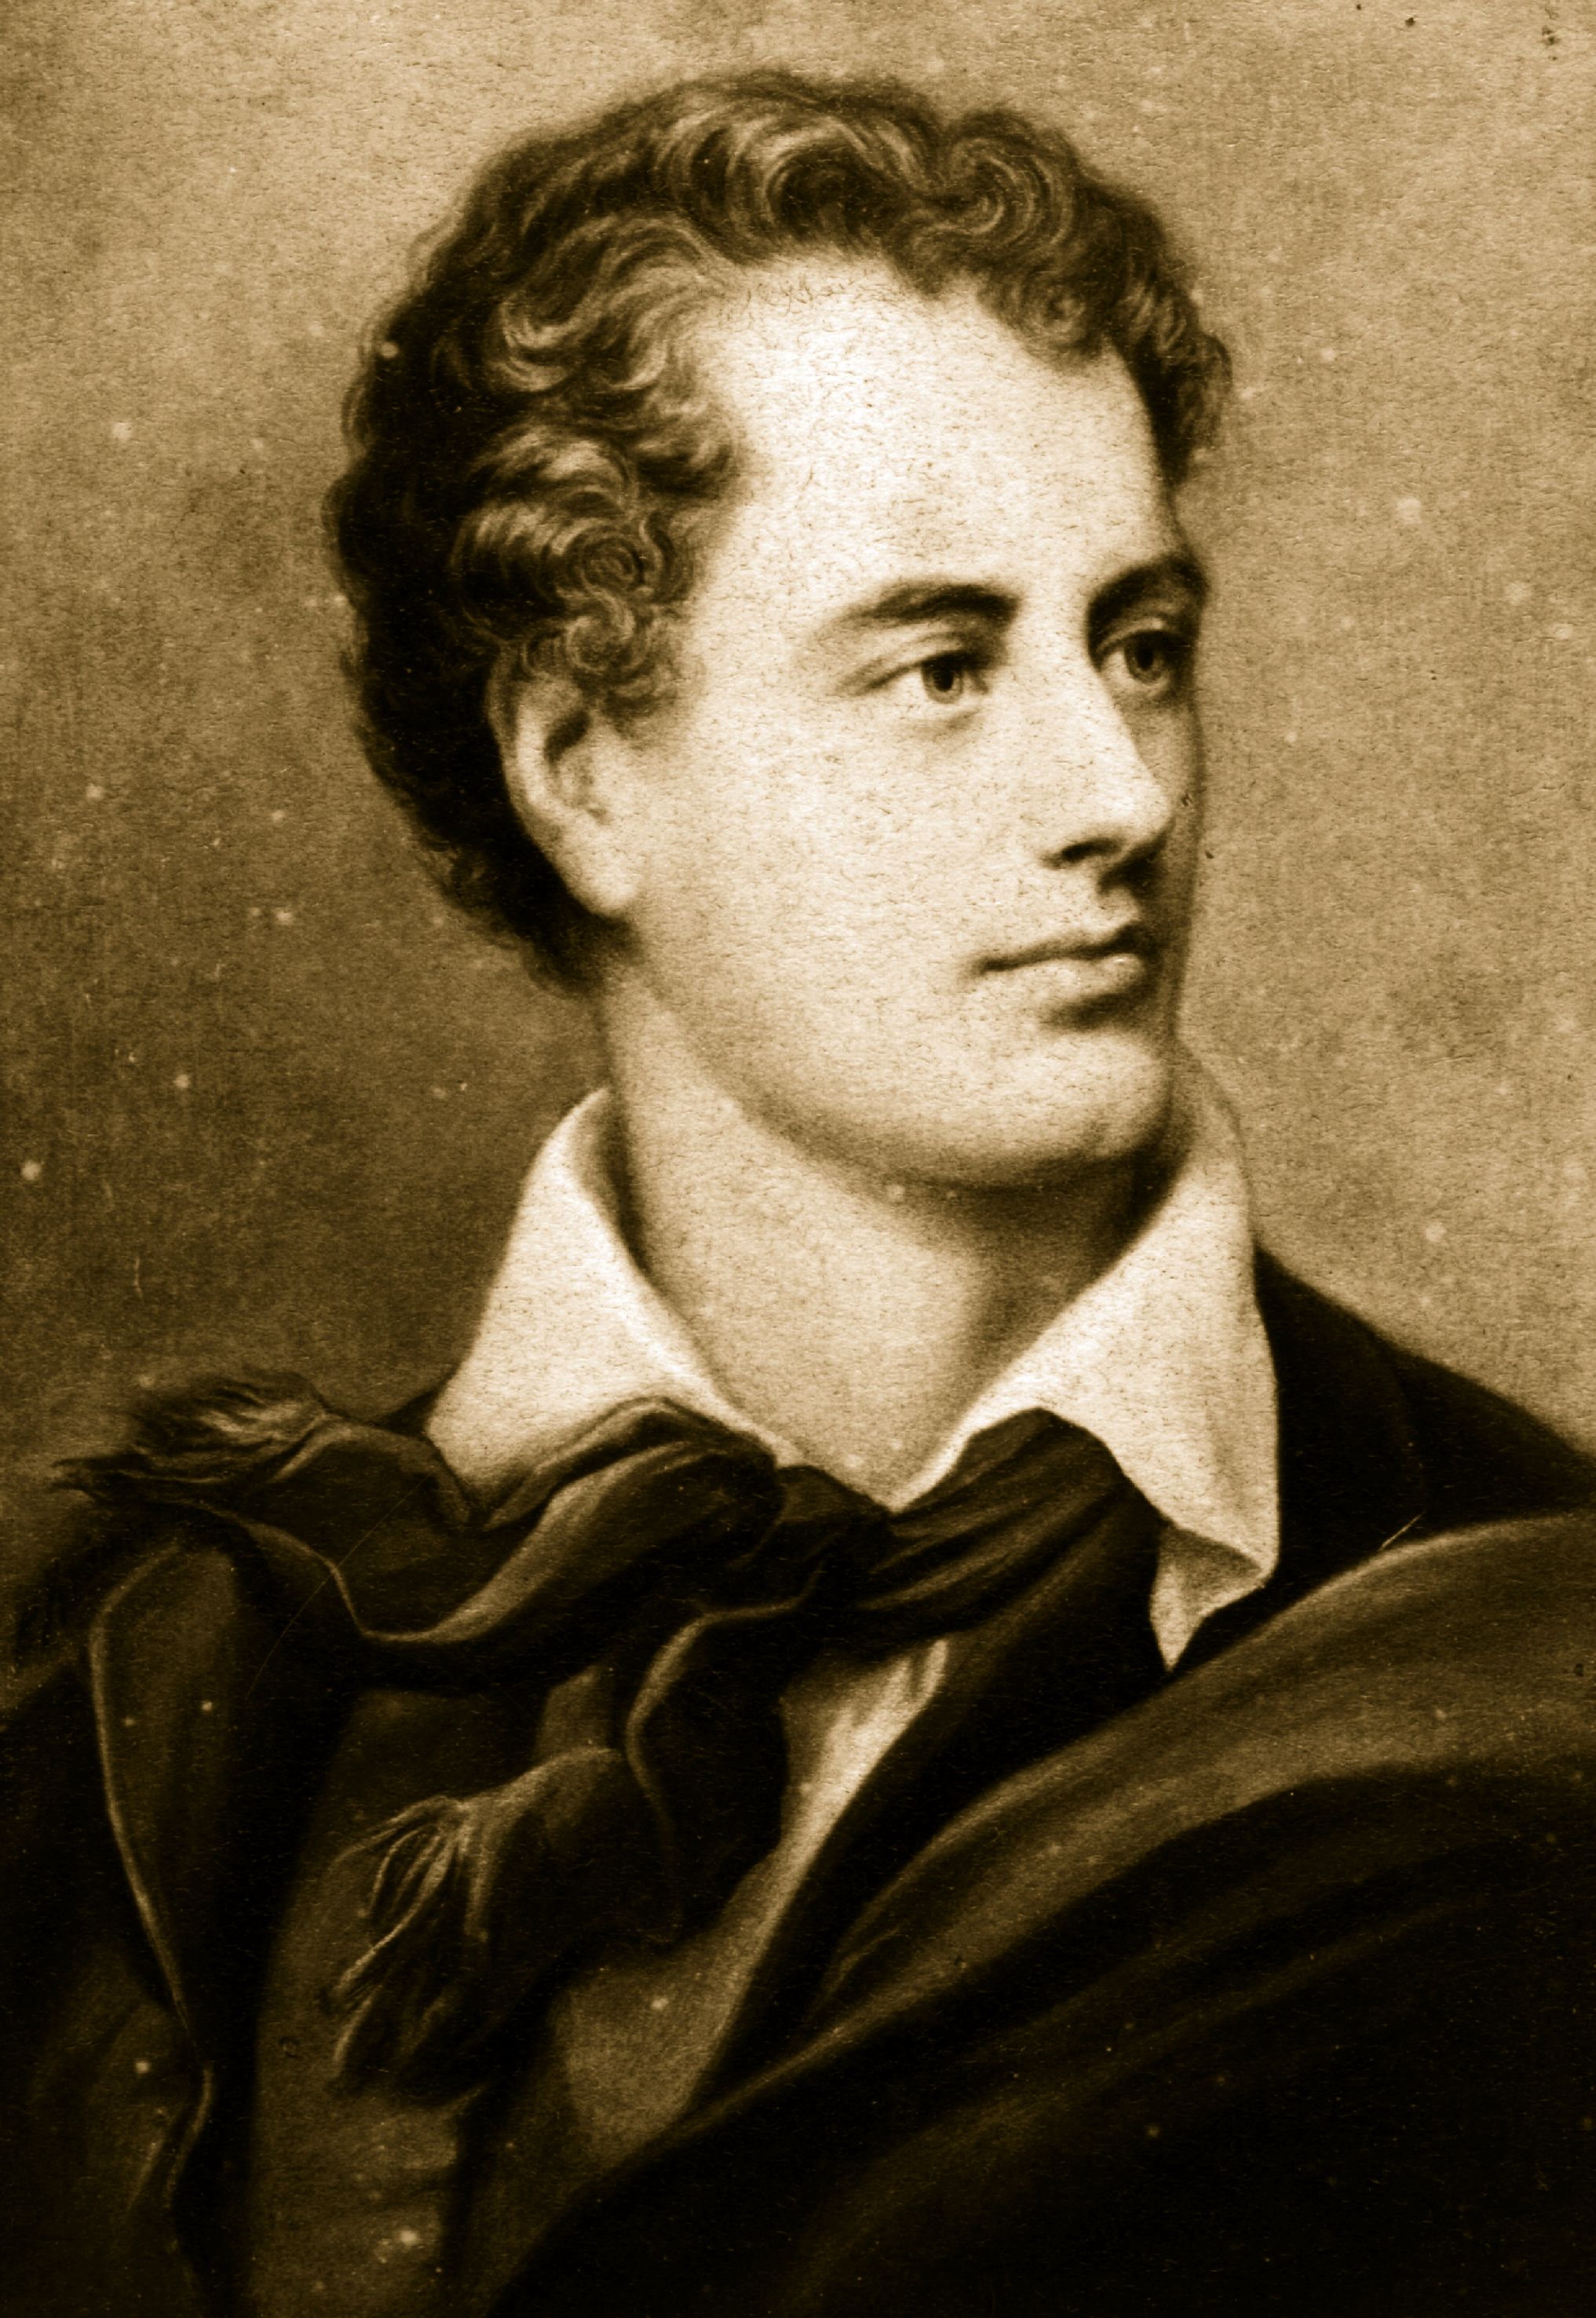 The “Byron Diet” is named after Victorian poet Lord Byron who would eat bizarre foods such as potatoes drenched in vinegar in an effort to look fashionably thin and pale.